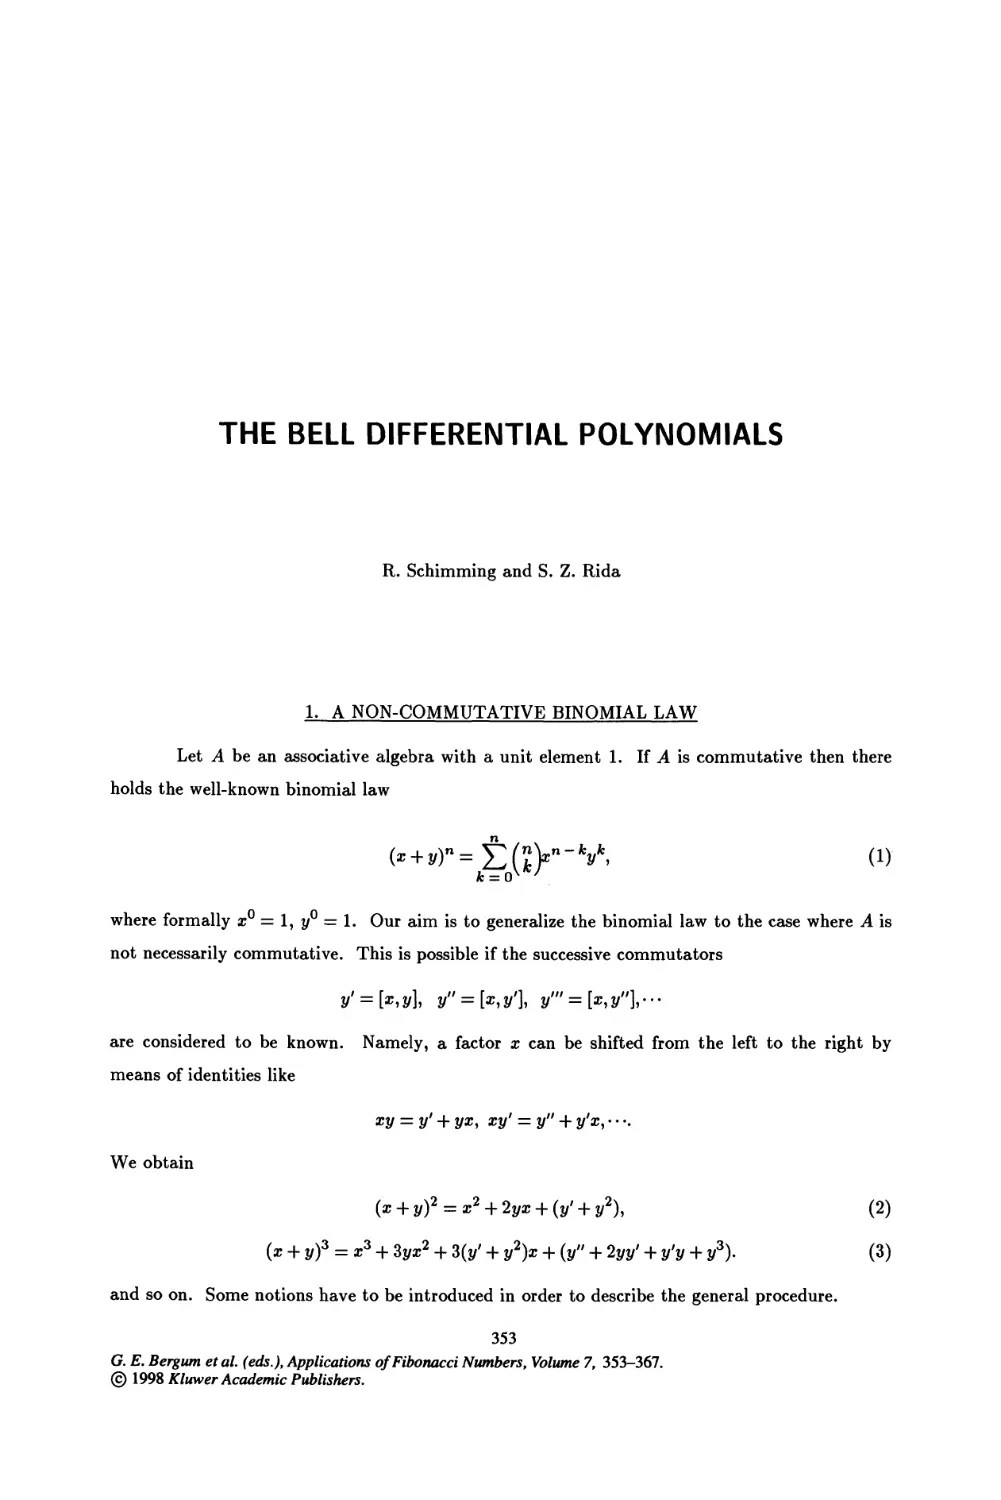 40. The Bell Differential Polynomials